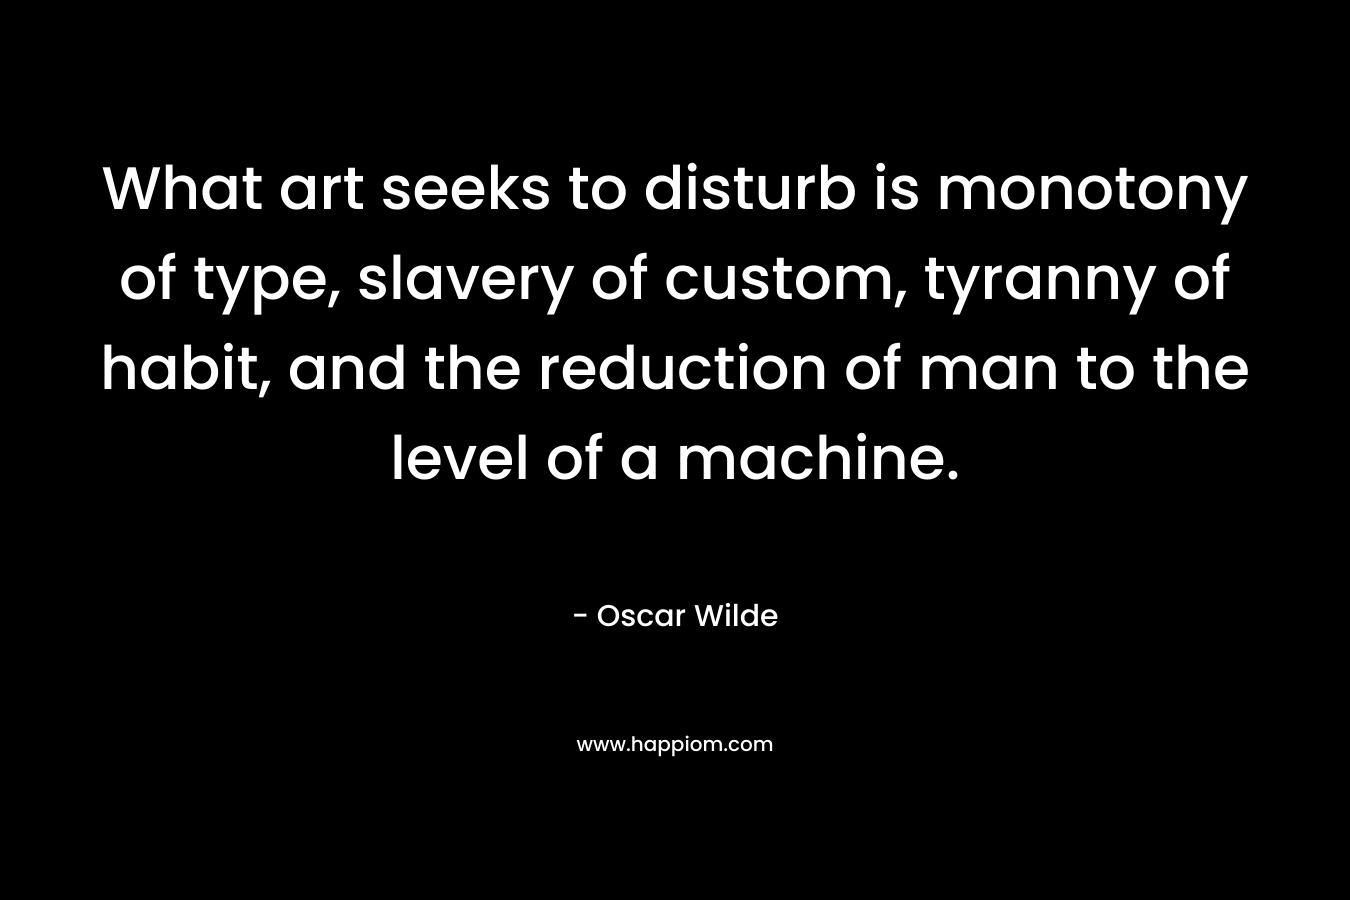 What art seeks to disturb is monotony of type, slavery of custom, tyranny of habit, and the reduction of man to the level of a machine.